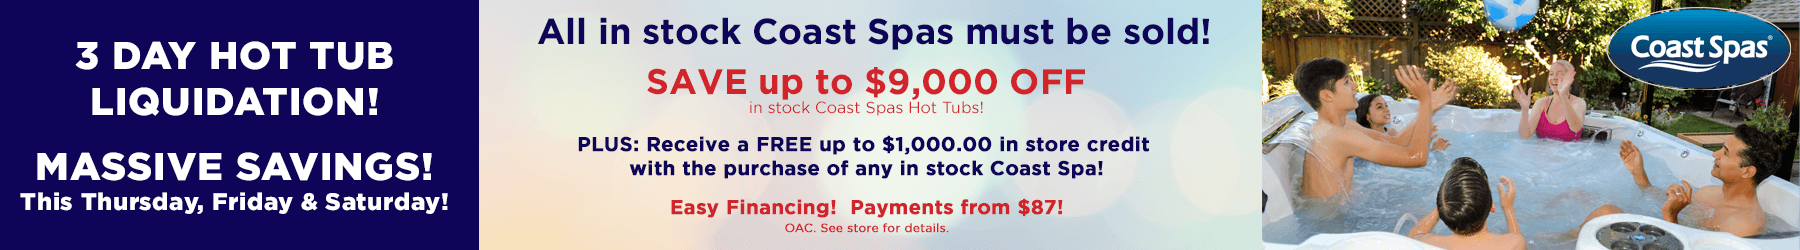 3-Day Hot Tub Liquidation - Massive Savings at Quality Stoves & Spas in Post Falls, ID!